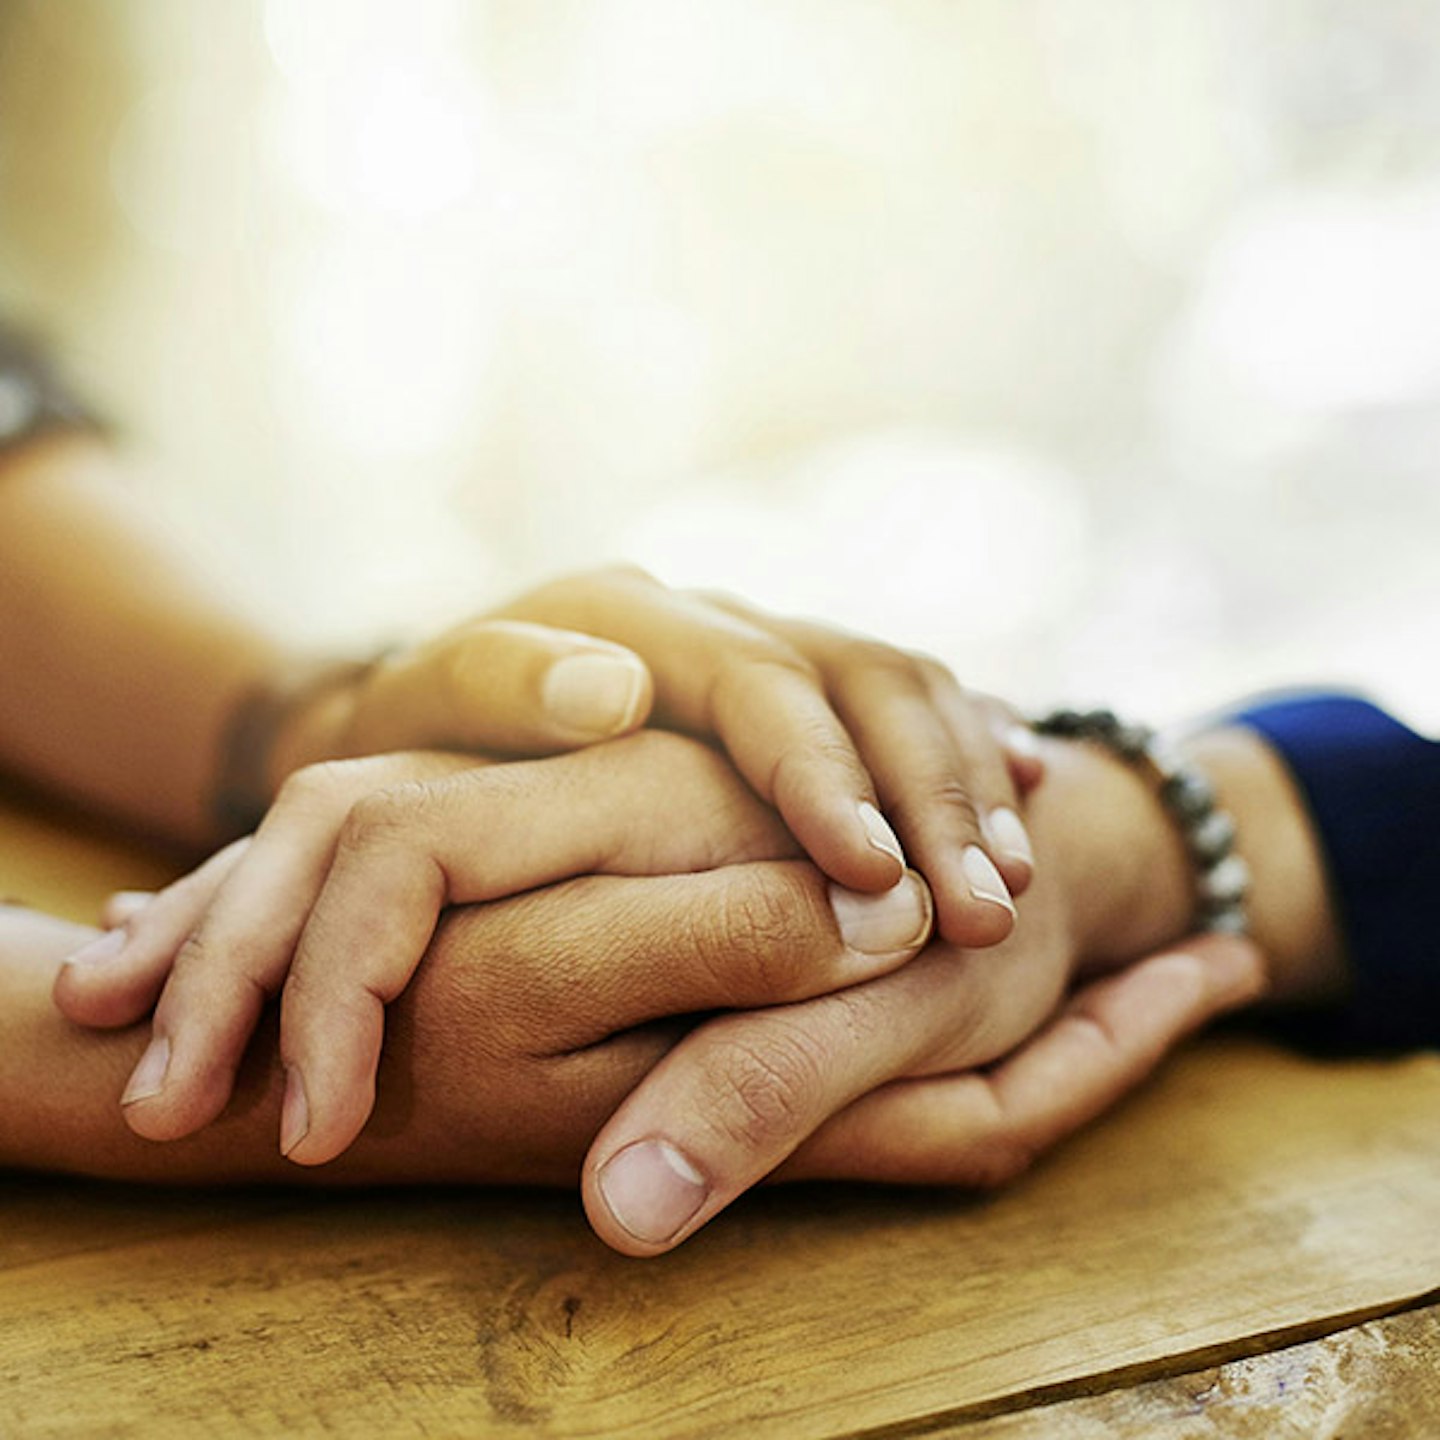 5 ways to support someone grieving